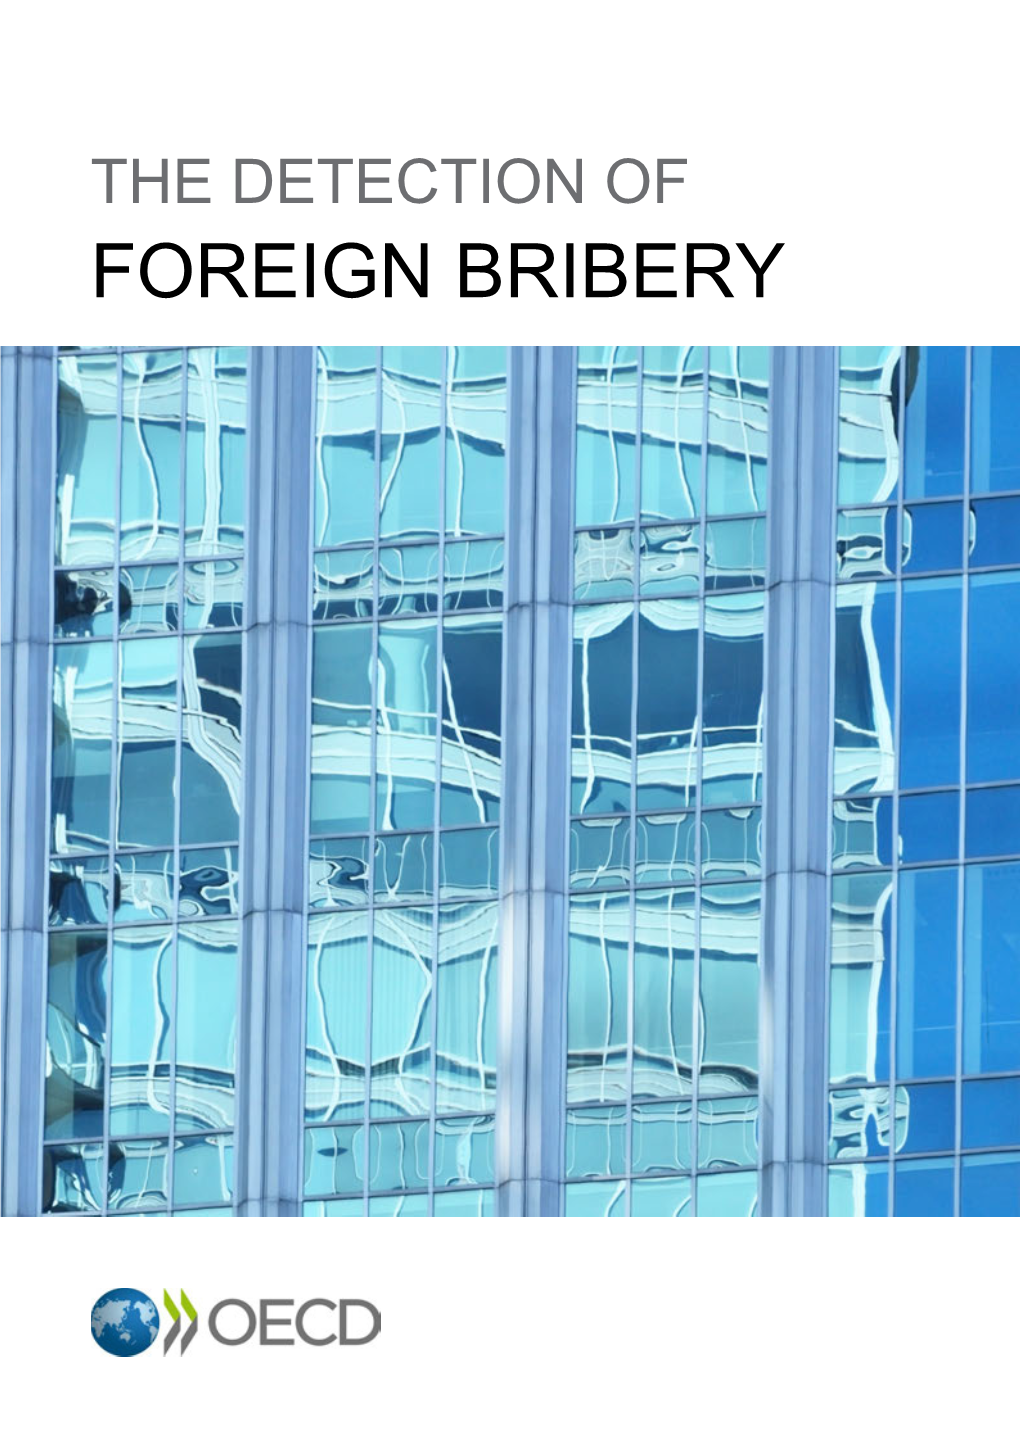 The Detection of Foreign Bribery